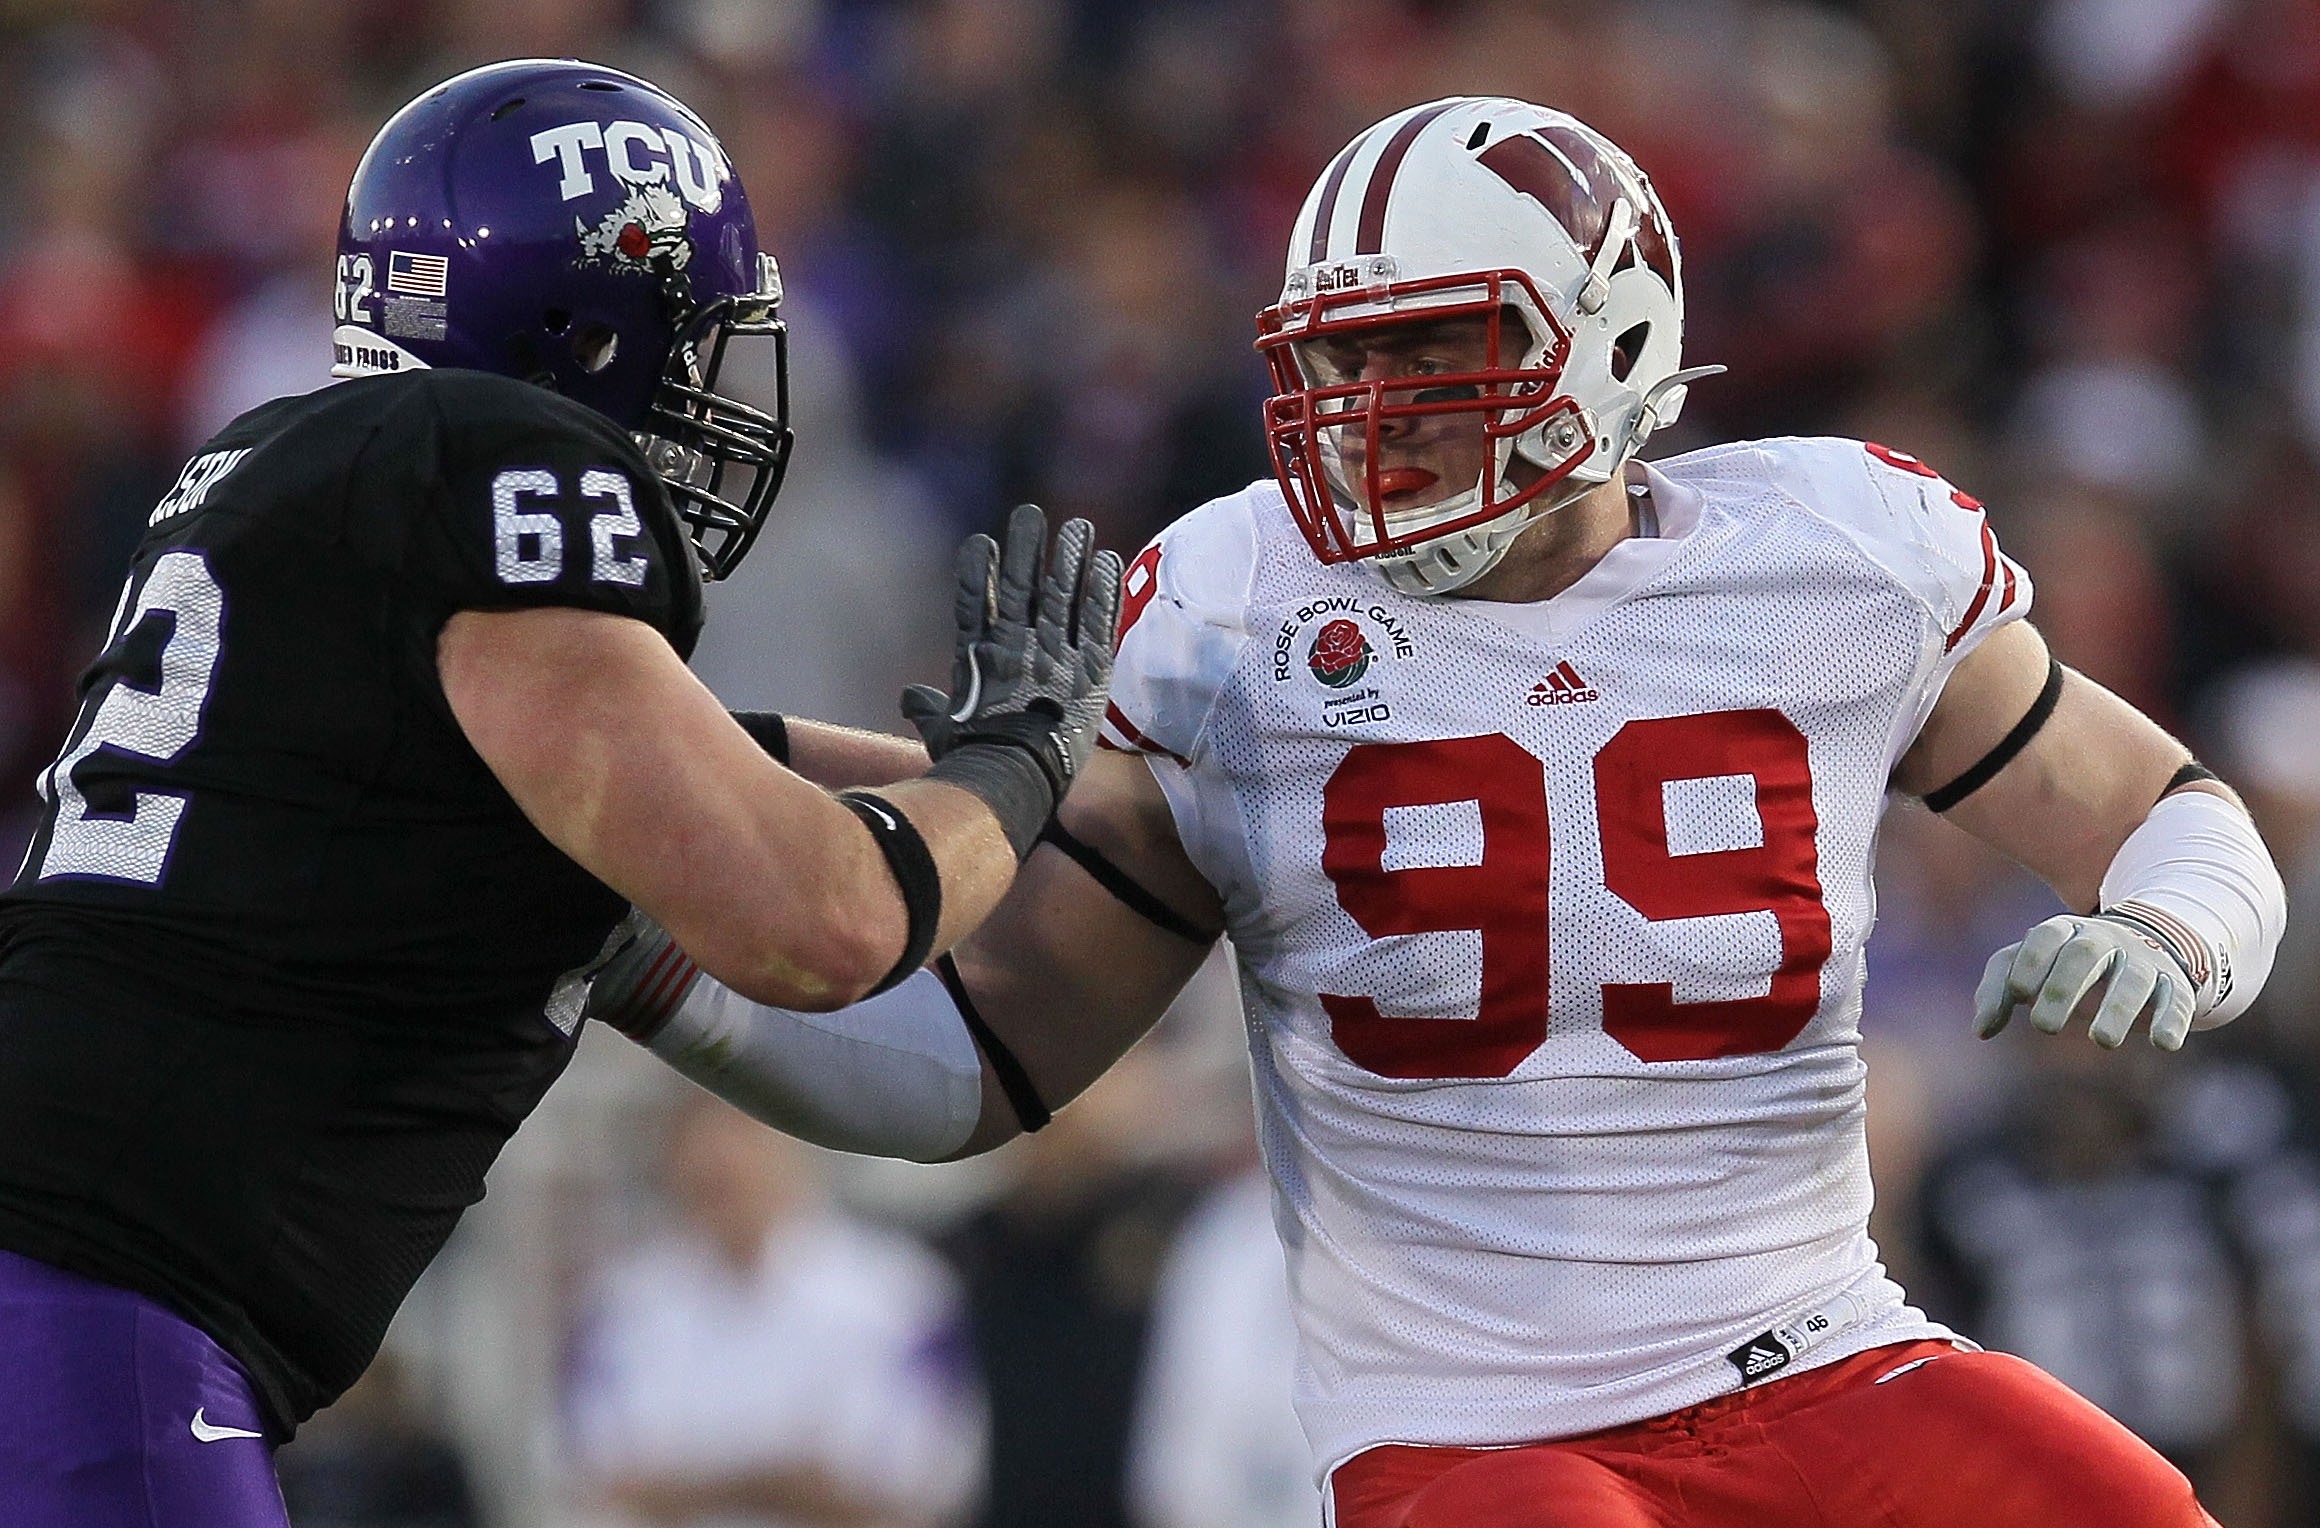 PASADENA, CA - JANUARY 01:  Defensive lineman J.J. Watt #99 of the Wisconsin Badgers rushes the TCU Horned Frogs in the 97th Rose Bowl game on January 1, 2011 in Pasadena, California.  (Photo by Stephen Dunn/Getty Images)